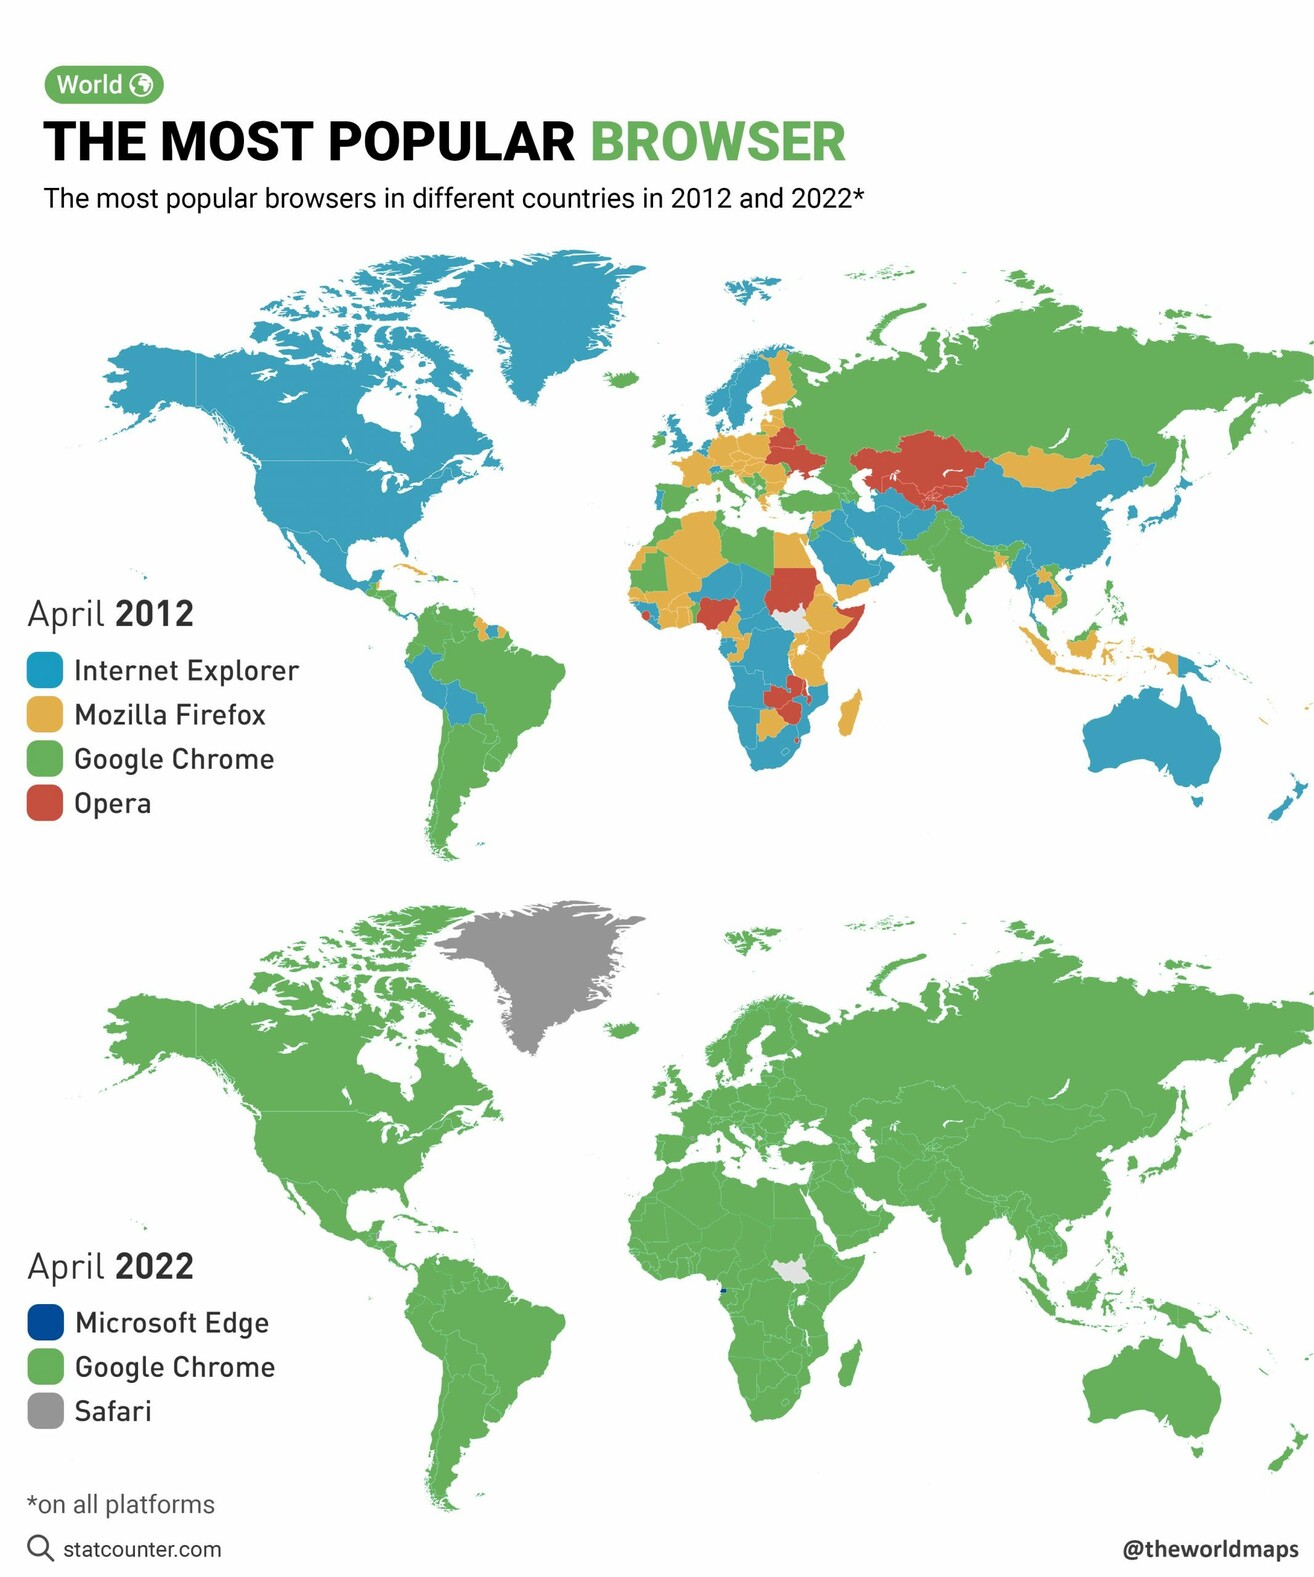 Most popular browsers in different countries in 2012 and 2022.

April 2012 map shows 4 browsers being used, IE, FF, Chrome and Opera... April 2022, the map is essentially all Chrome.